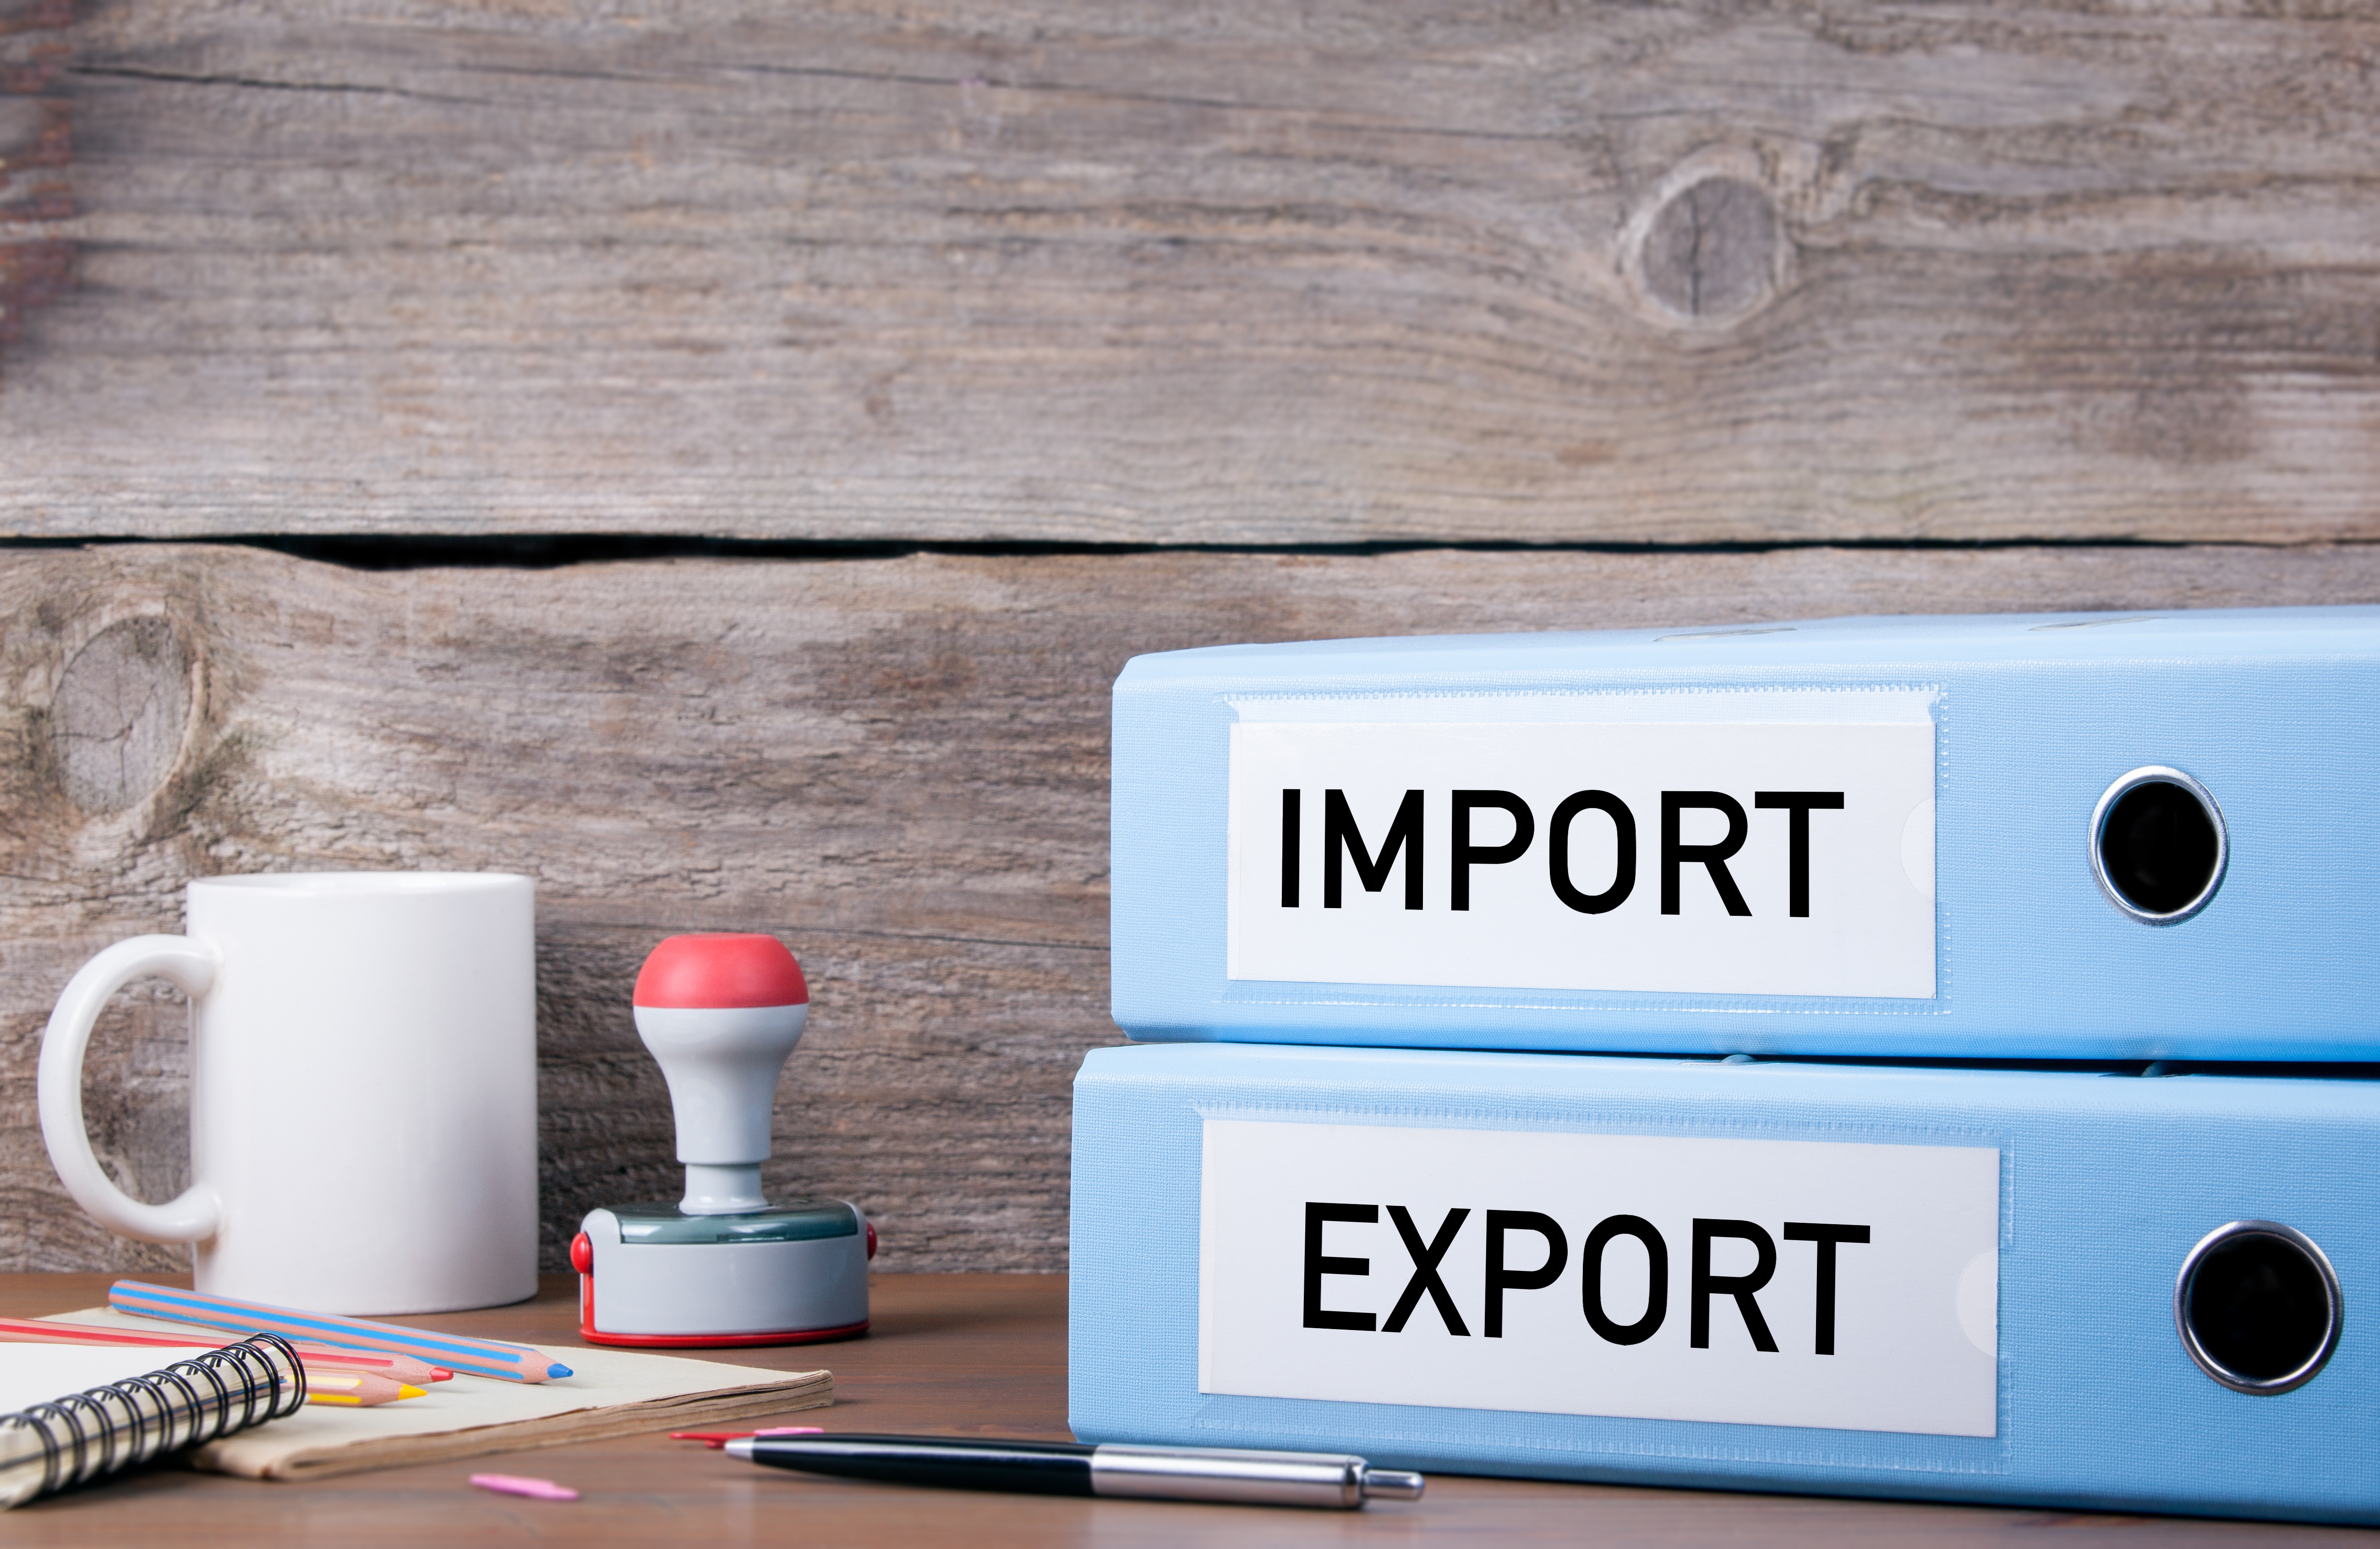 Two binders on a desk labelled "import" and "export"